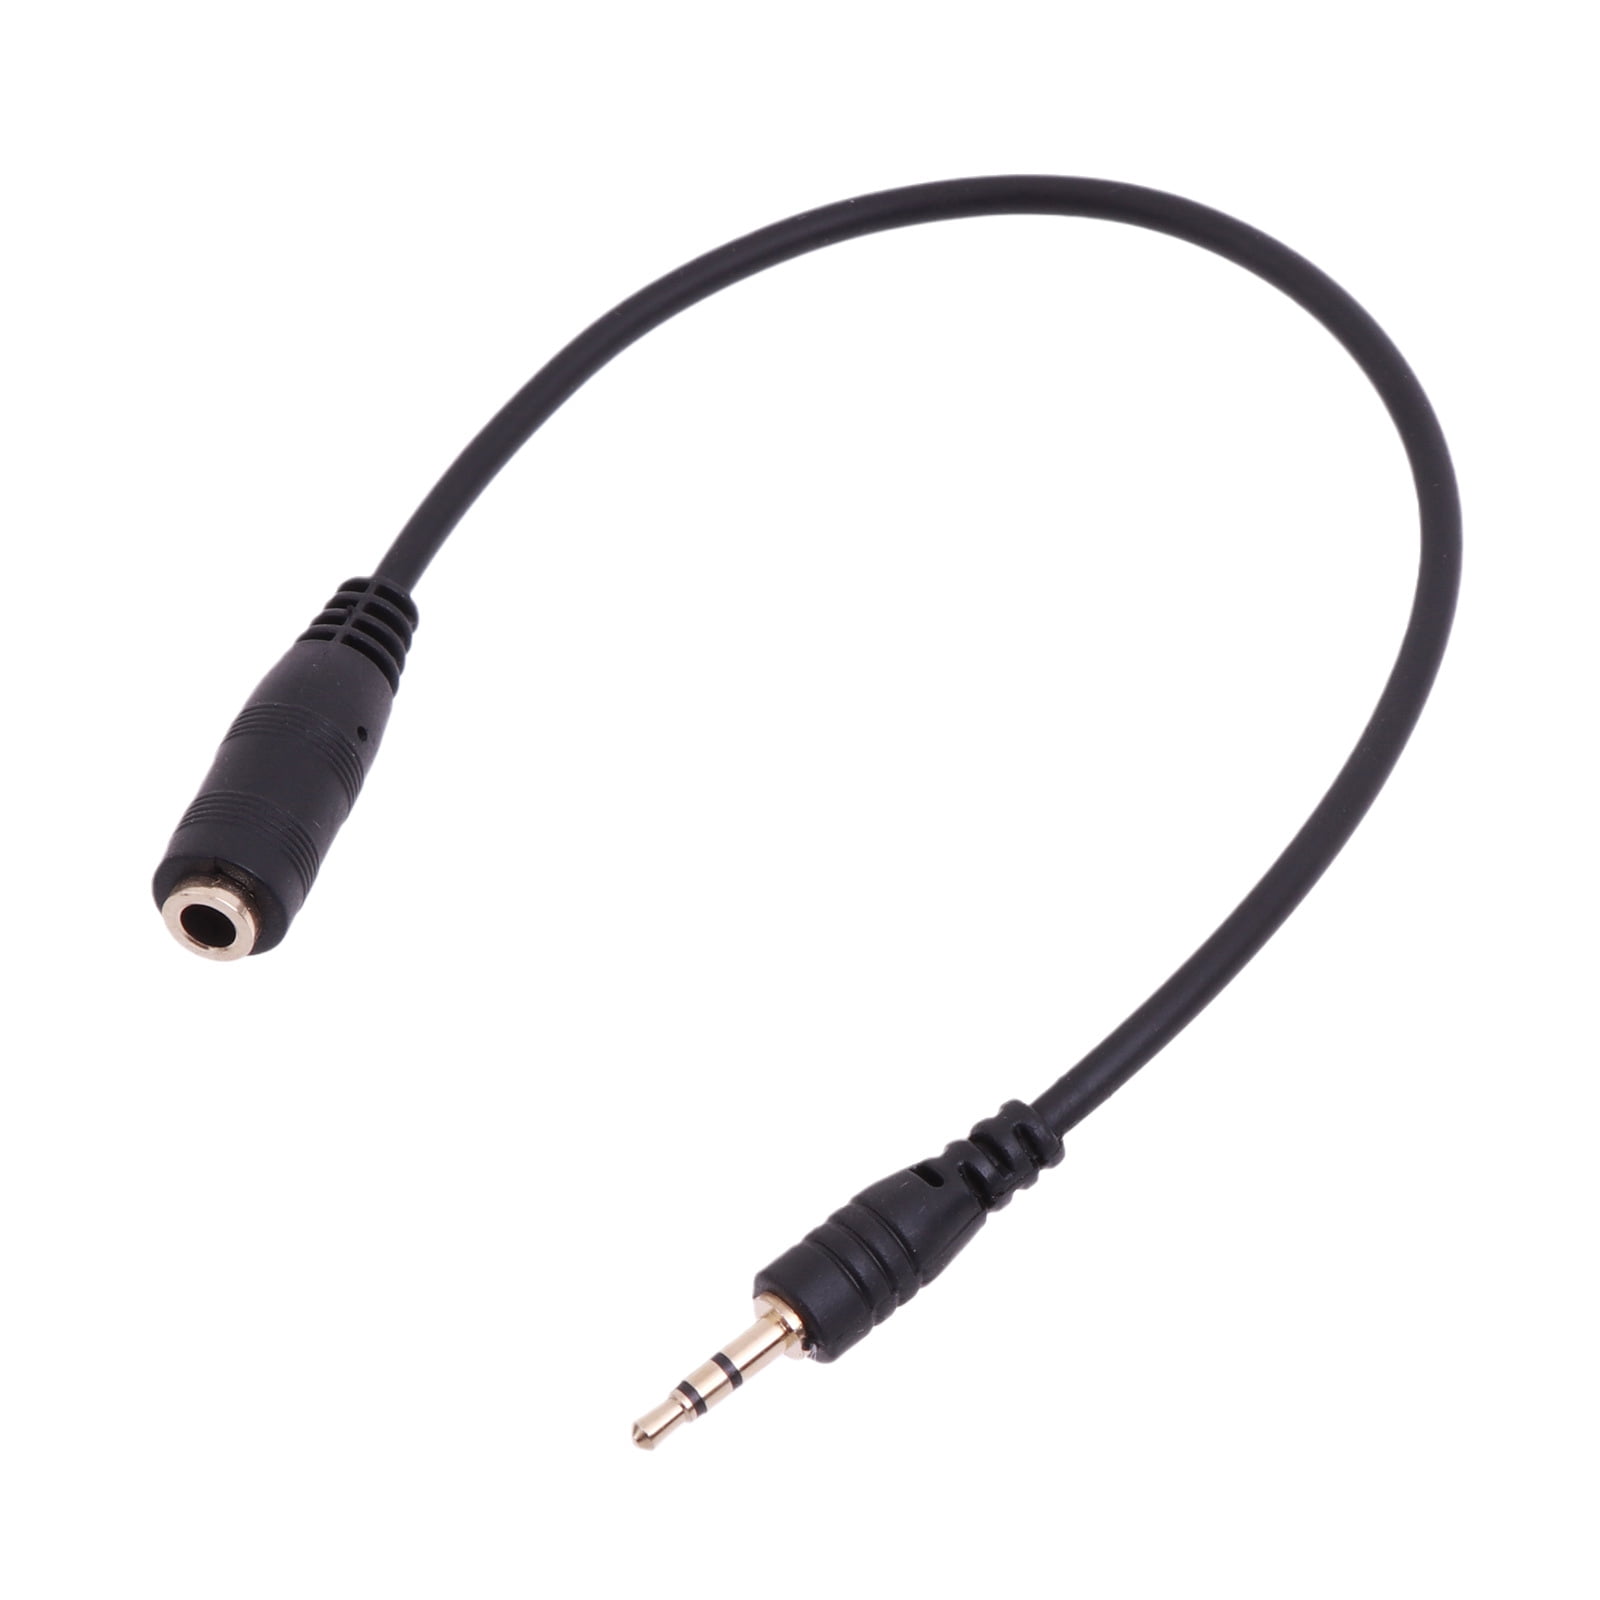 Jack 3.5 mm to 2.5 mm Audio Adapter 2.5mm Male to 3.5mm Female Plug  Connector for Aux Speaker Cable Stereo Headphone Headset Mic